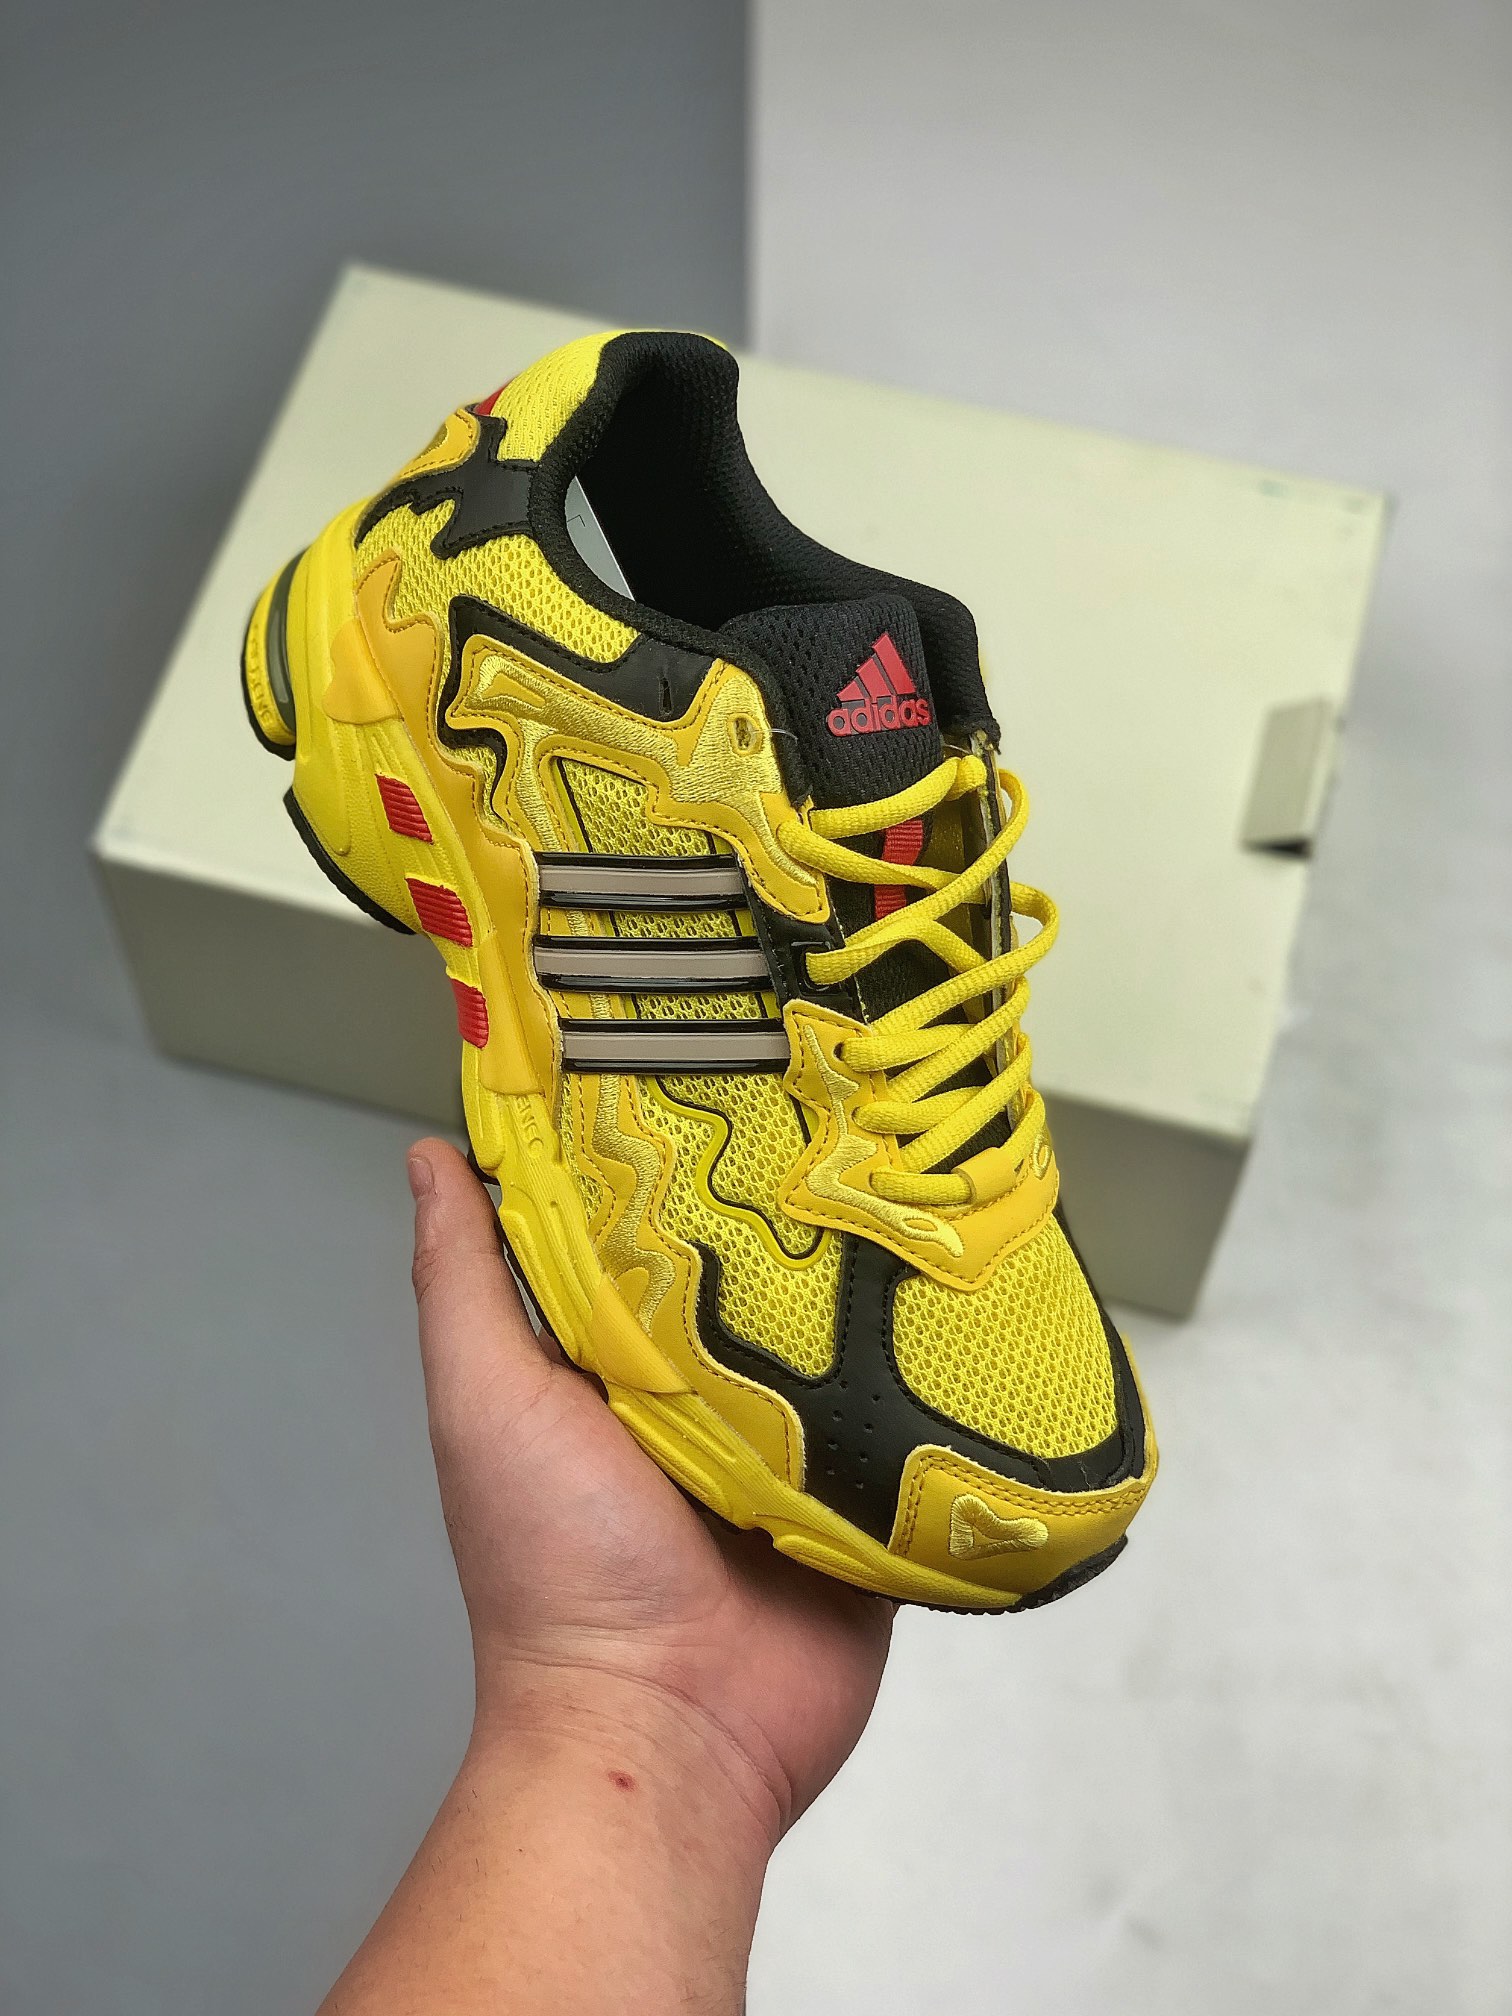 Adidas Bad Bunny x Response CL Yellow GY0101 | Limited Edition